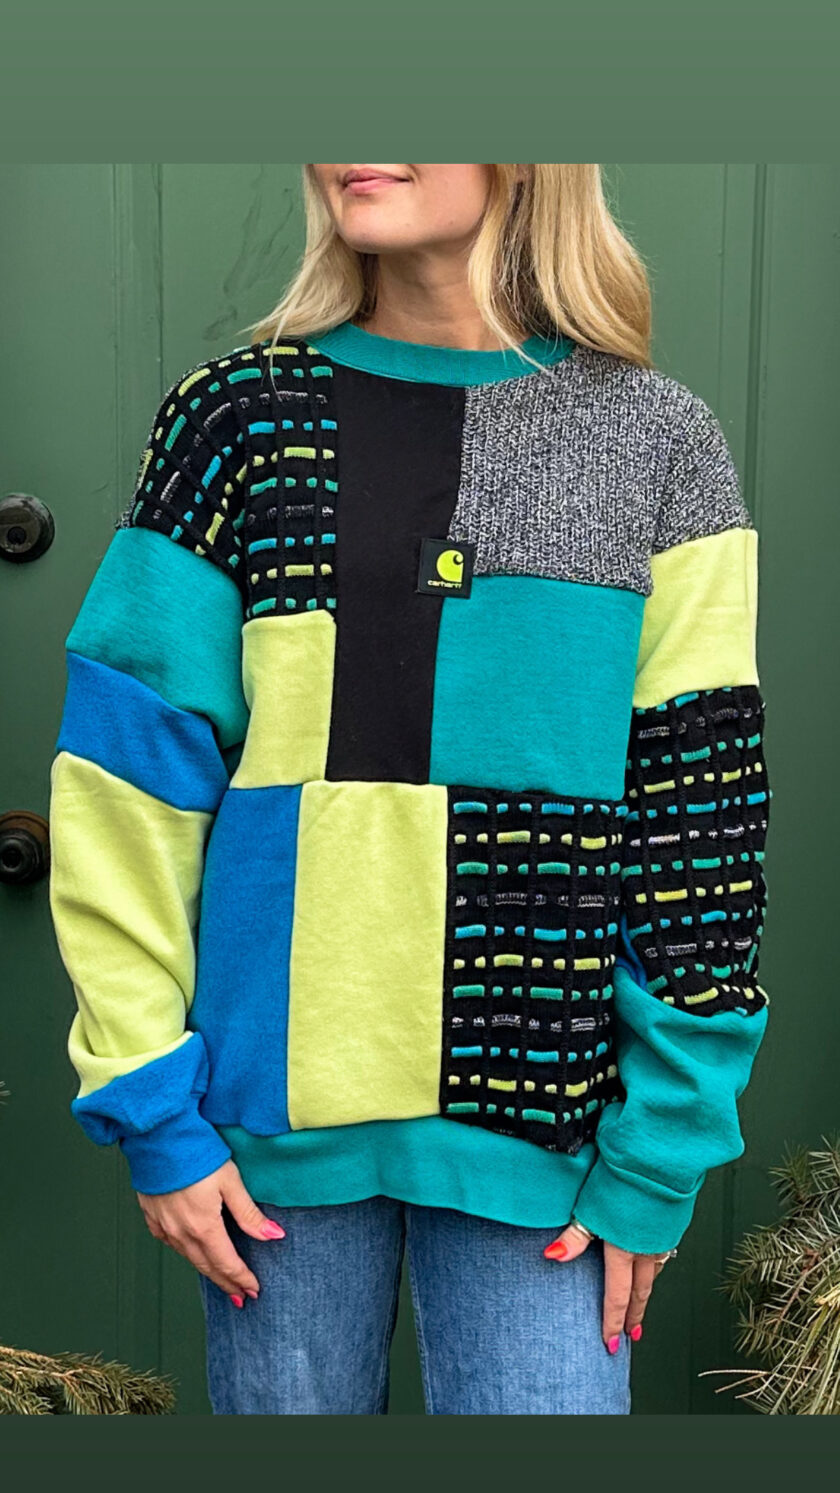 A woman wearing a blue, green, and black sweater.